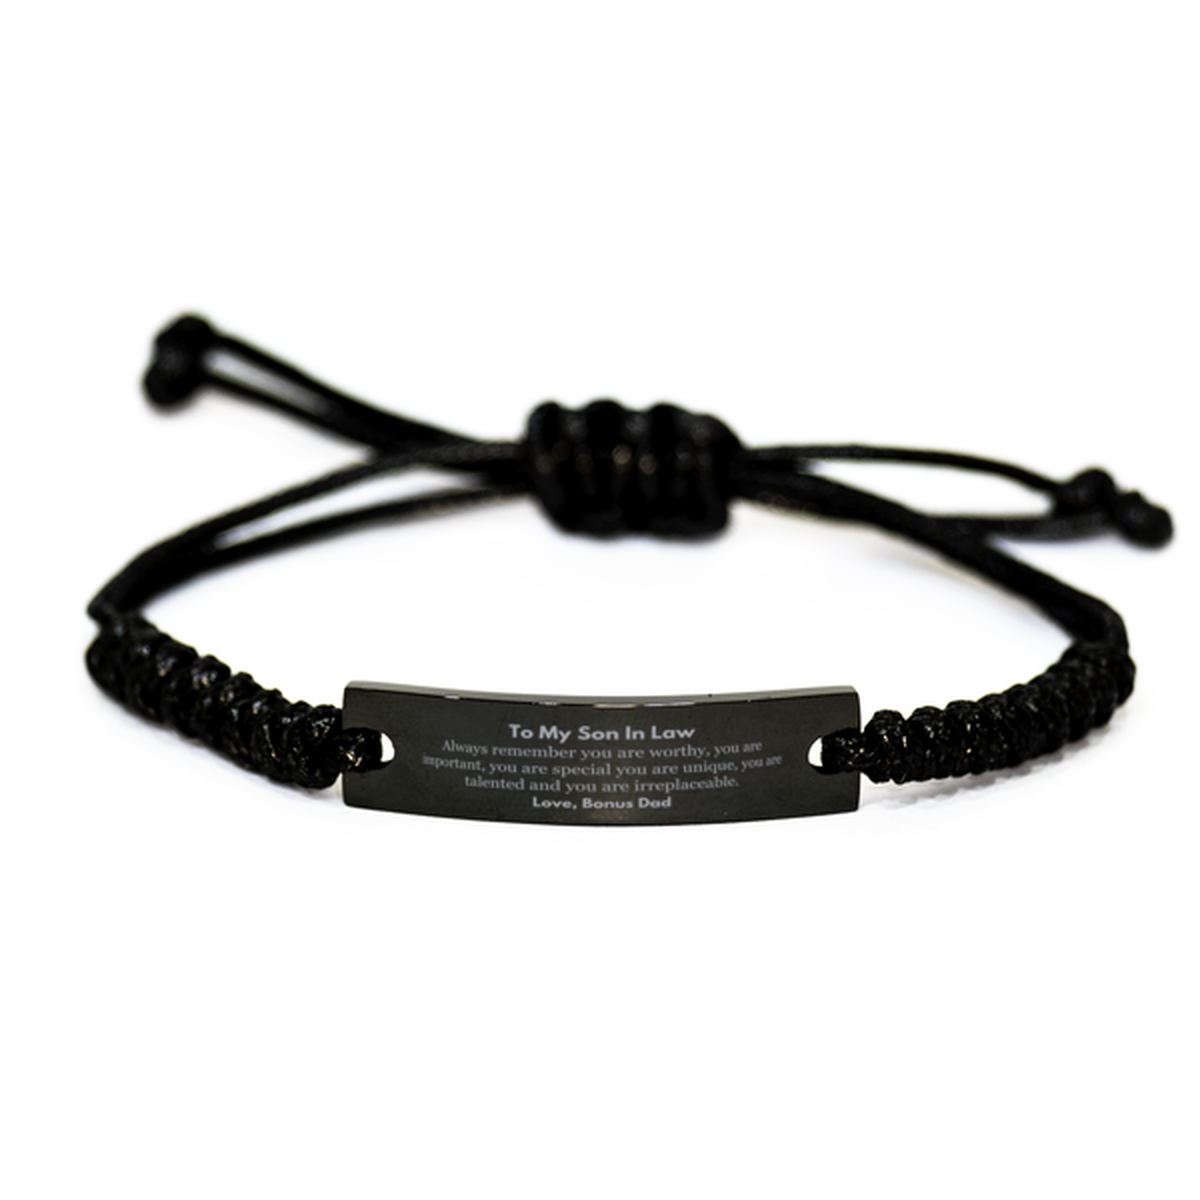 Son In Law Birthday Gifts from Bonus Dad, Inspirational Black Rope Bracelet for Son In Law Christmas Graduation Gifts for Son In Law Always remember you are worthy, you are important. Love, Bonus Dad